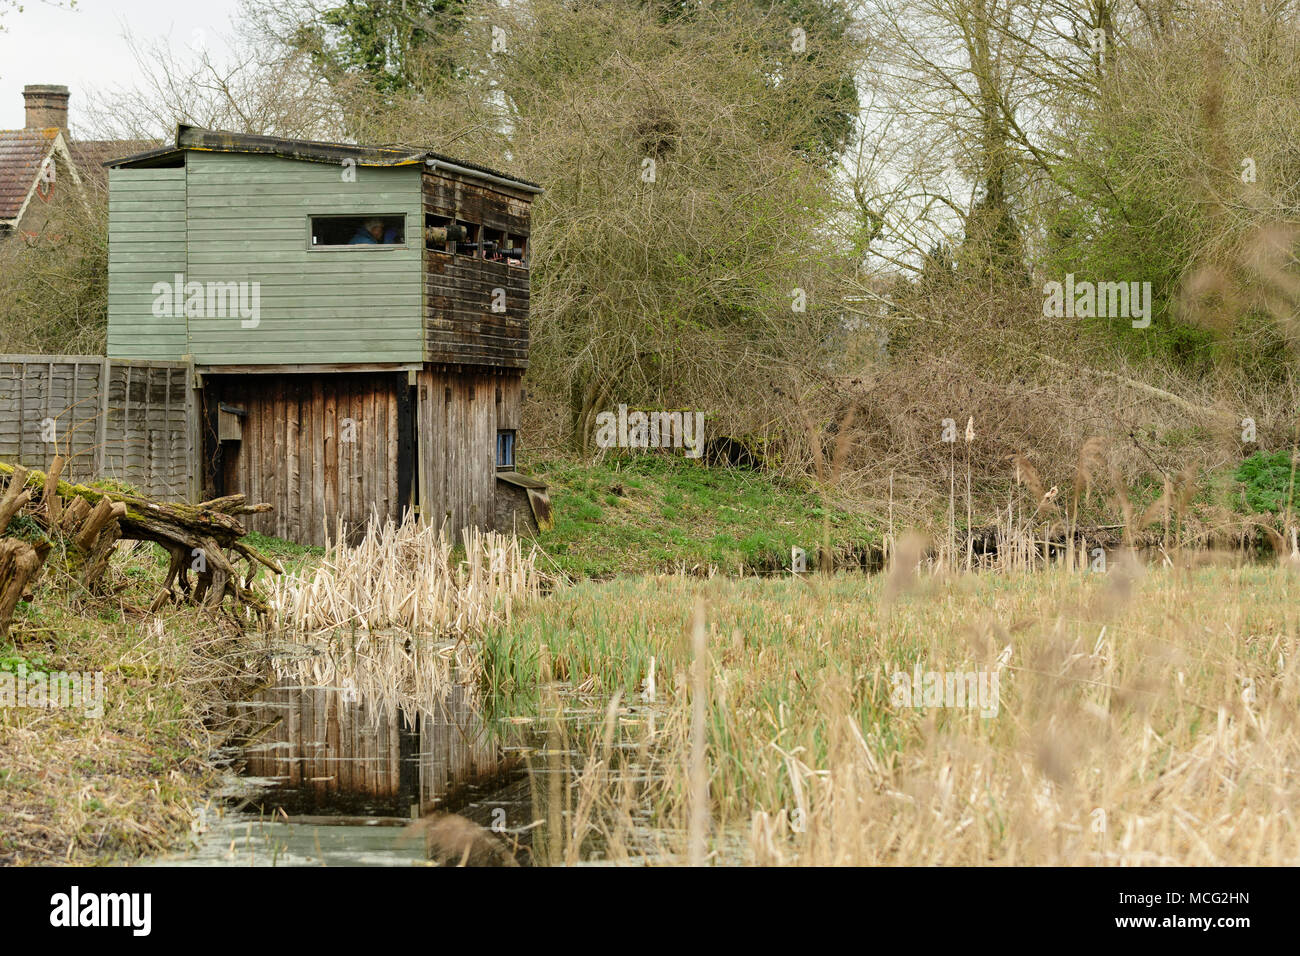 Kingfisher Hide with wildlife photographer's lenses in Rye Meads RSPB nature reserve, Hoddesdon, England Stock Photo